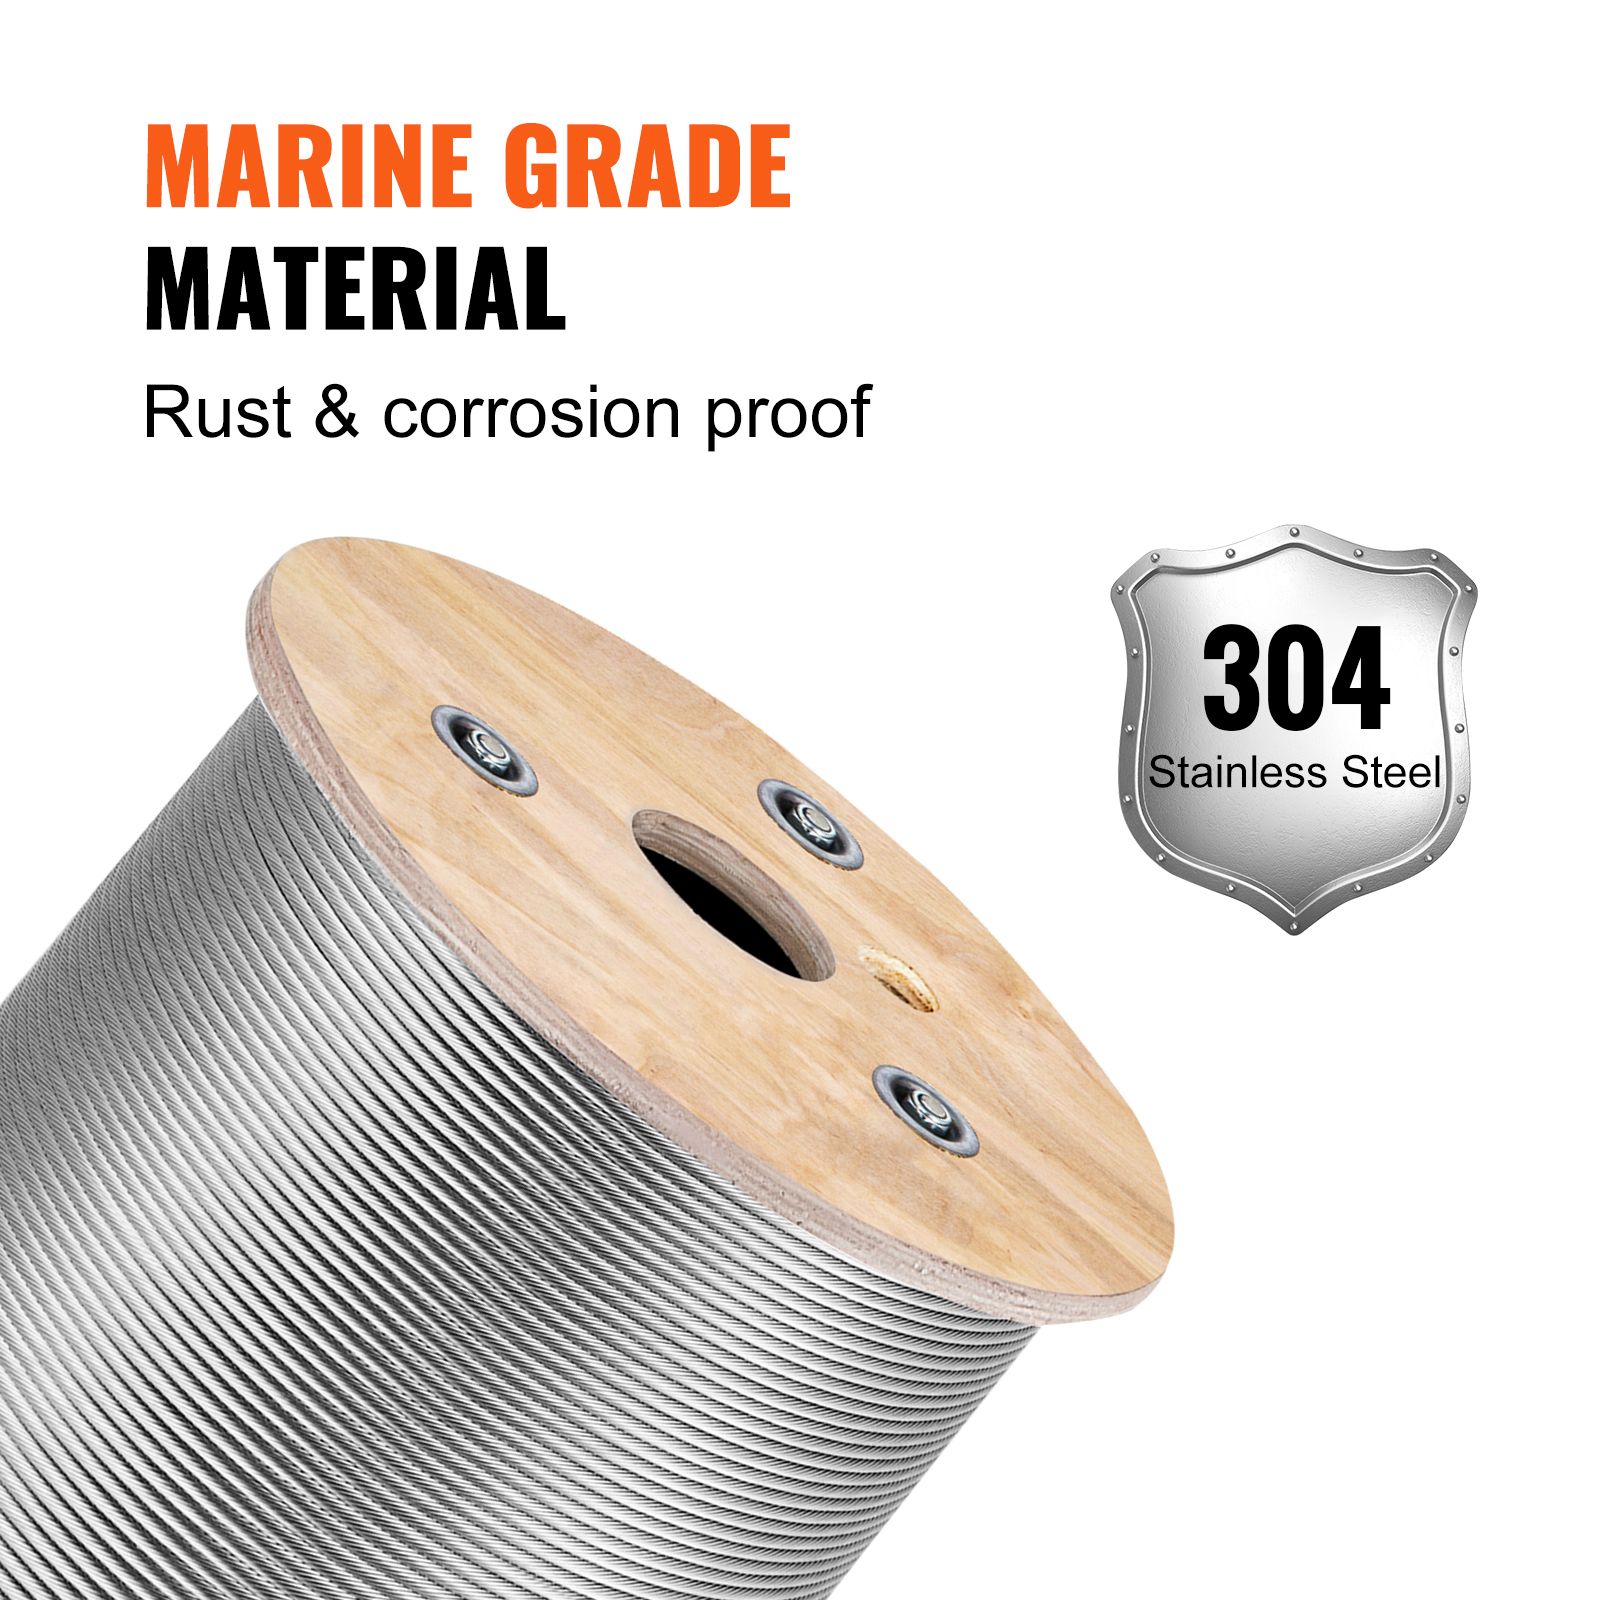 LOVSHARE 3/16 Inch Wire Rope Cable 500FT Reel 304 Stainless Steel Cable Steel 7x19 Strand Core Cable Steel